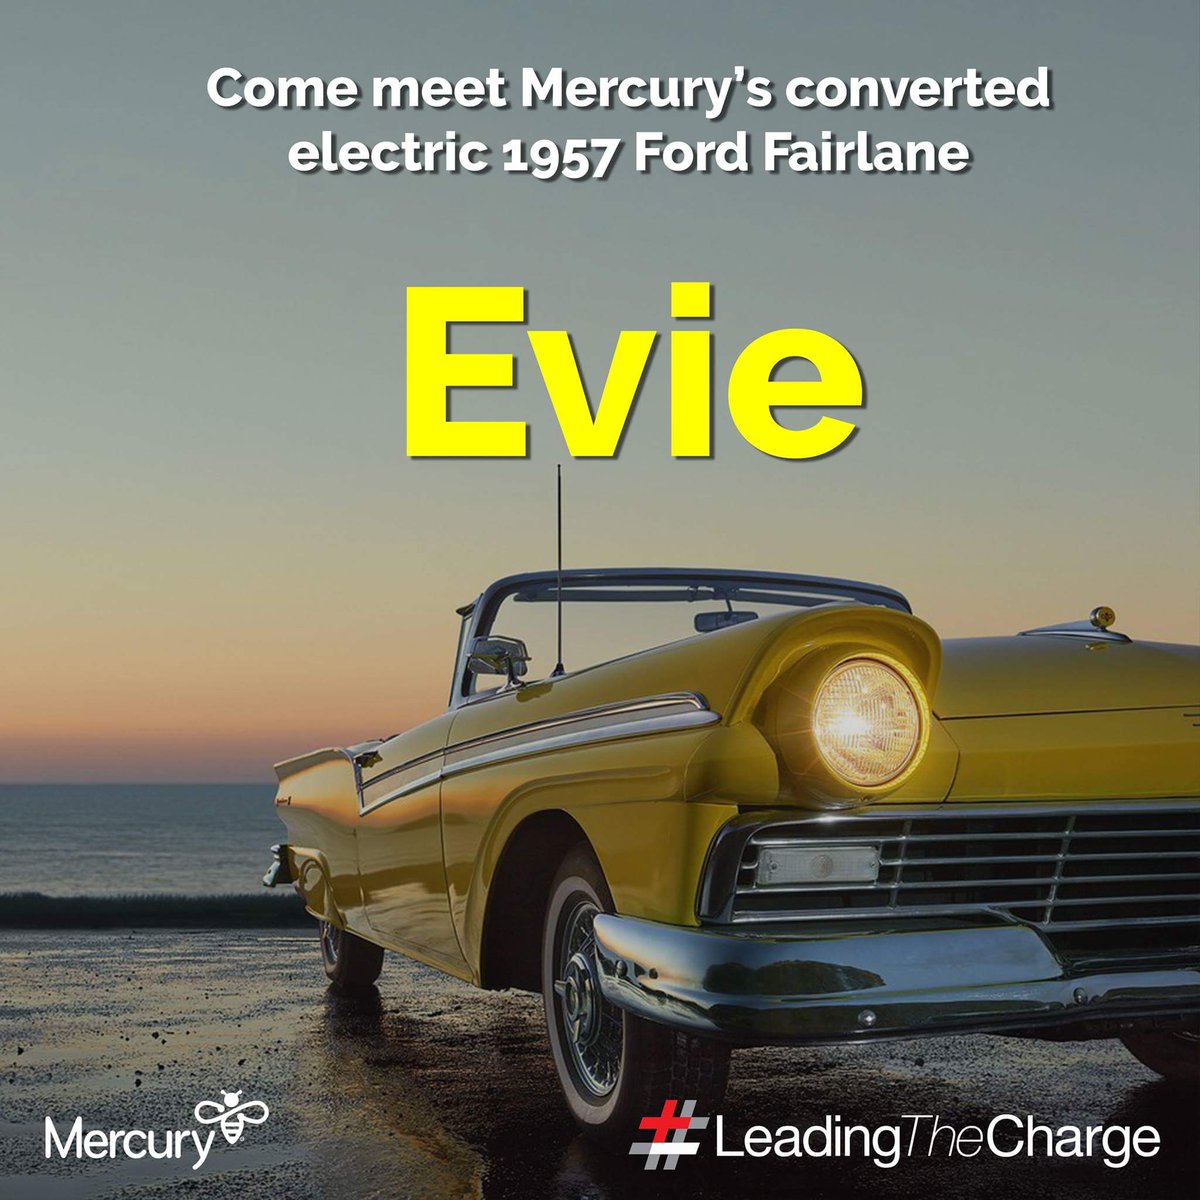 We're pleased to announce that @MercuryNZ's 'Evie', a 1957 Ford Fairlane that was converted into an electric vehicle will be joining us on the #LeadingTheCharge road trip. 

📍#Hamilton: 28 March, 3pm - Garden place
📍#Auckland: 31 March, 12pm - @AUTuni Sports & Fitness Centre